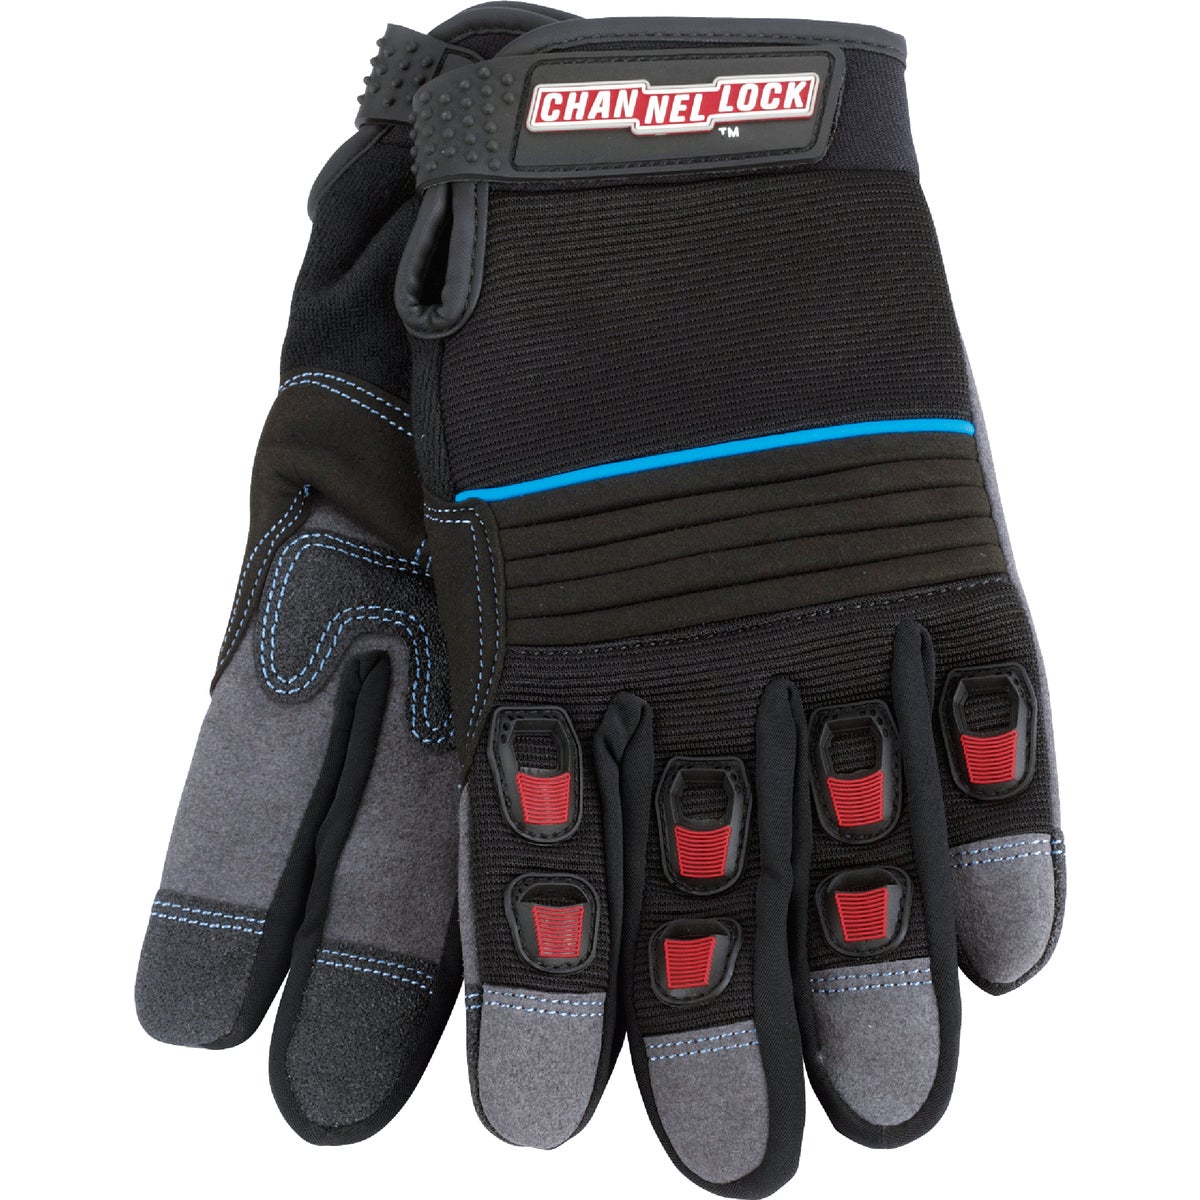 Item 760546, All-purpose synthetic leather performance glove.